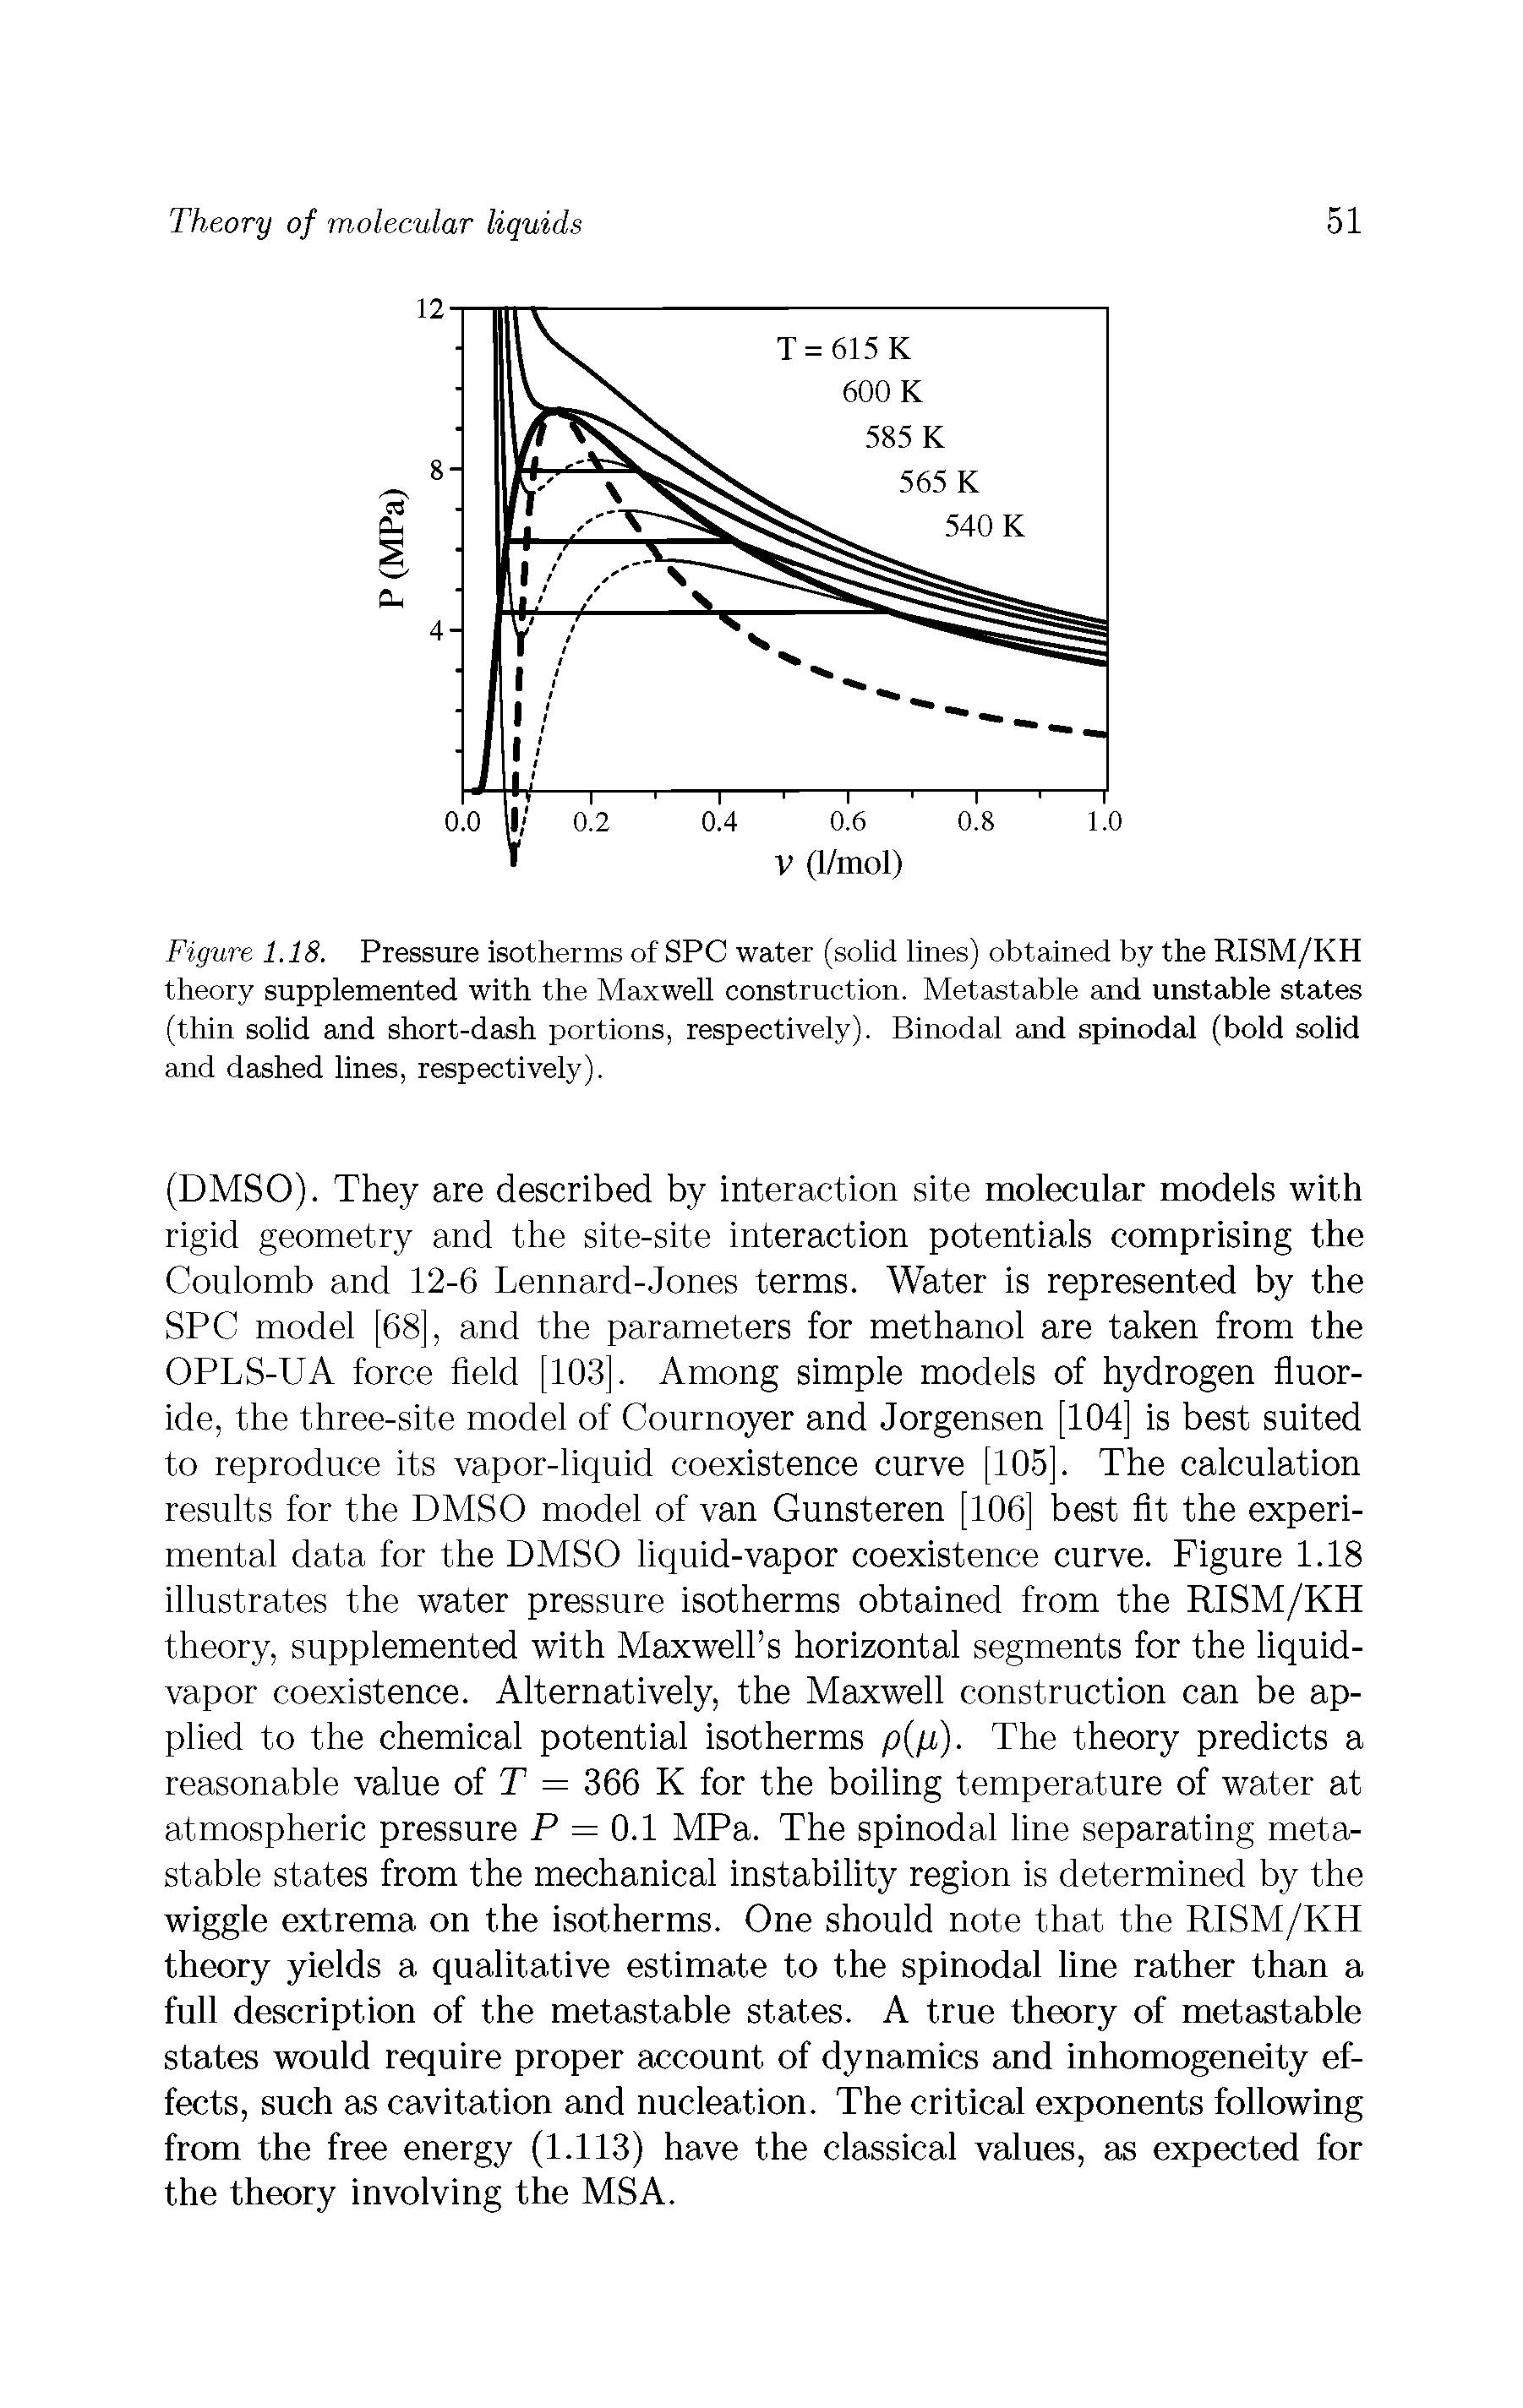 Figure 1.18. Pressure isotherms of SPC water (solid lines) obtained by the RISM/KH theory supplemented with the Maxwell construction. Metastable and unstable states (thin solid and short-dash portions, respectively). Binodal and spinodal (bold solid and dashed lines, respectively).